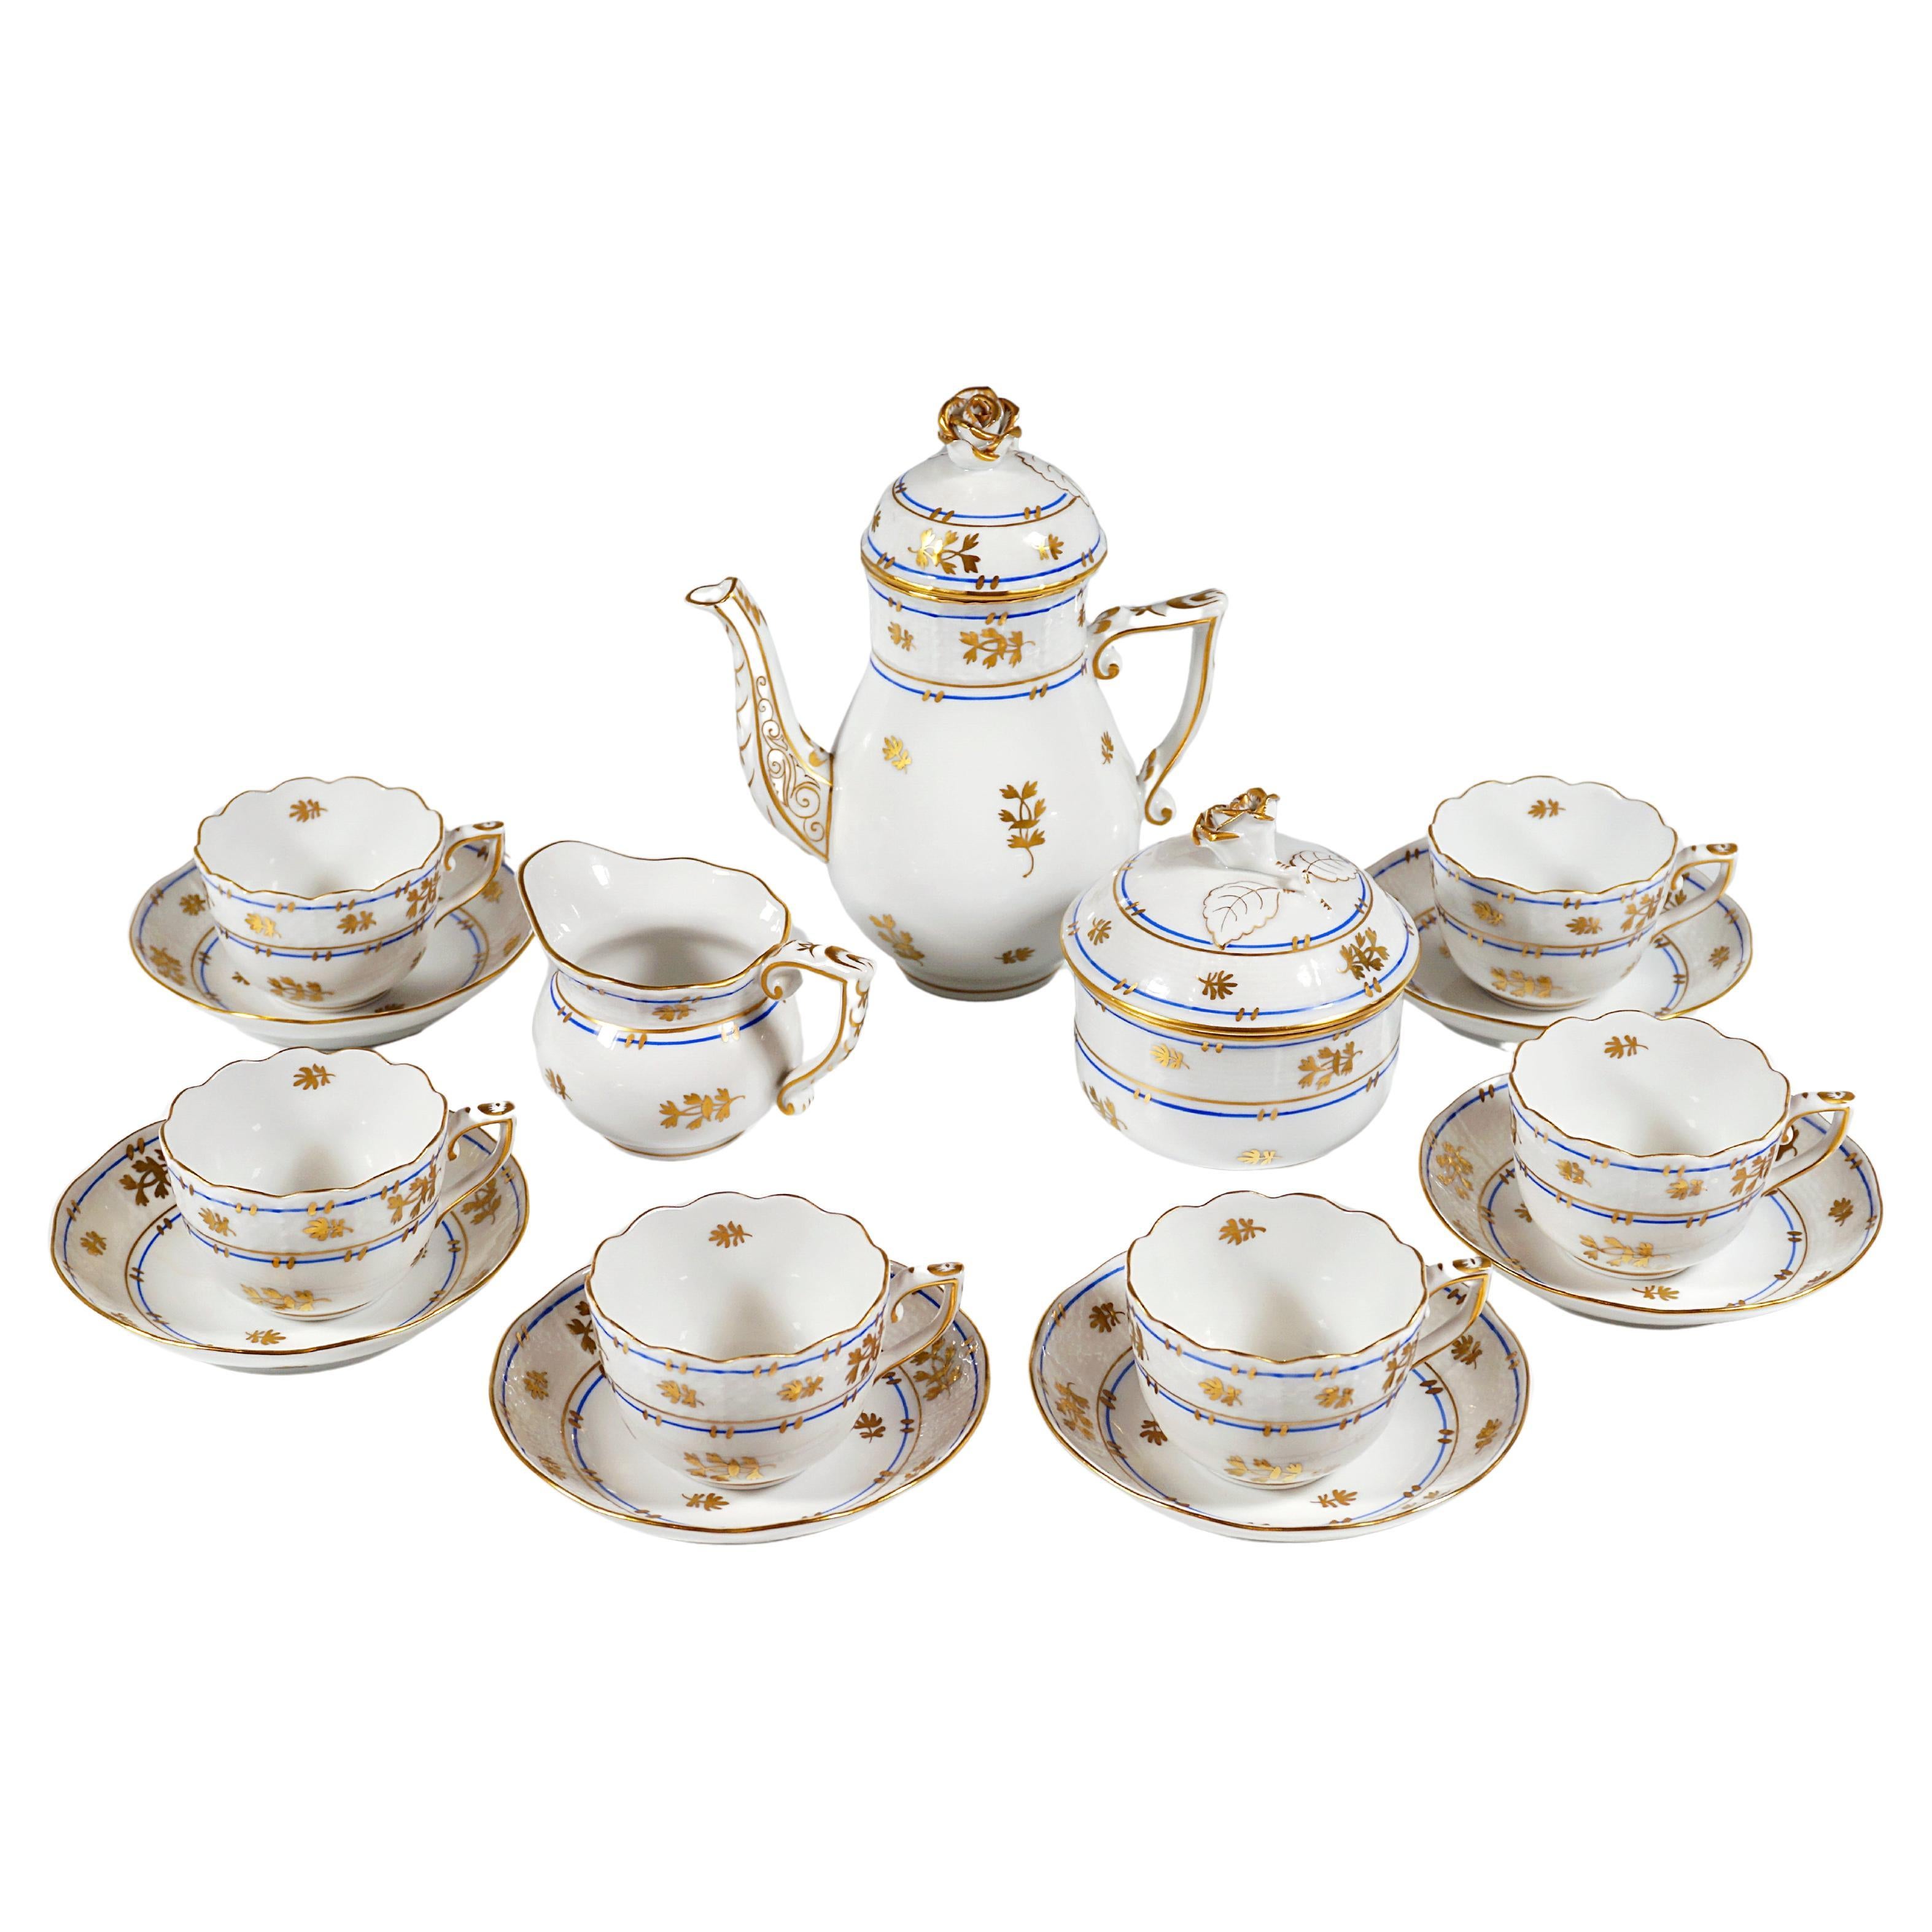 Herend Batthyany Blue Mocha Coffee Set For 6 Persons, Hungary, 20th Century